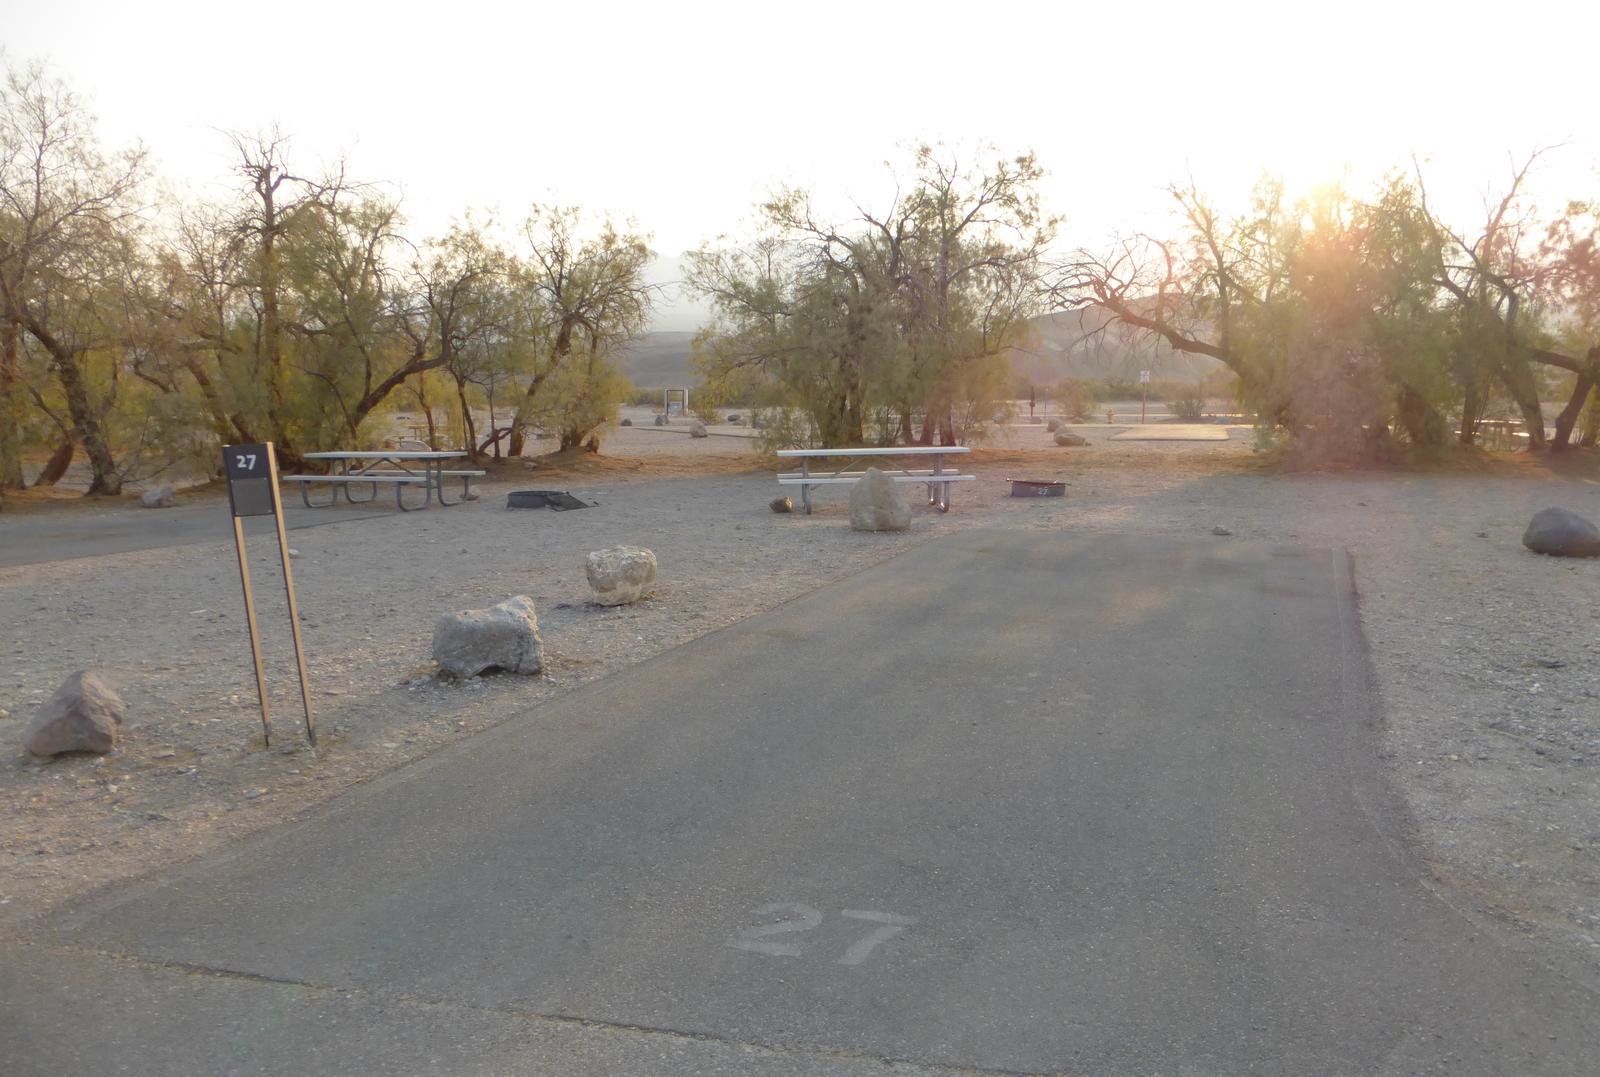 Furnace Creek Campground standard nonelectric site #27 with picnic table and fire ring.